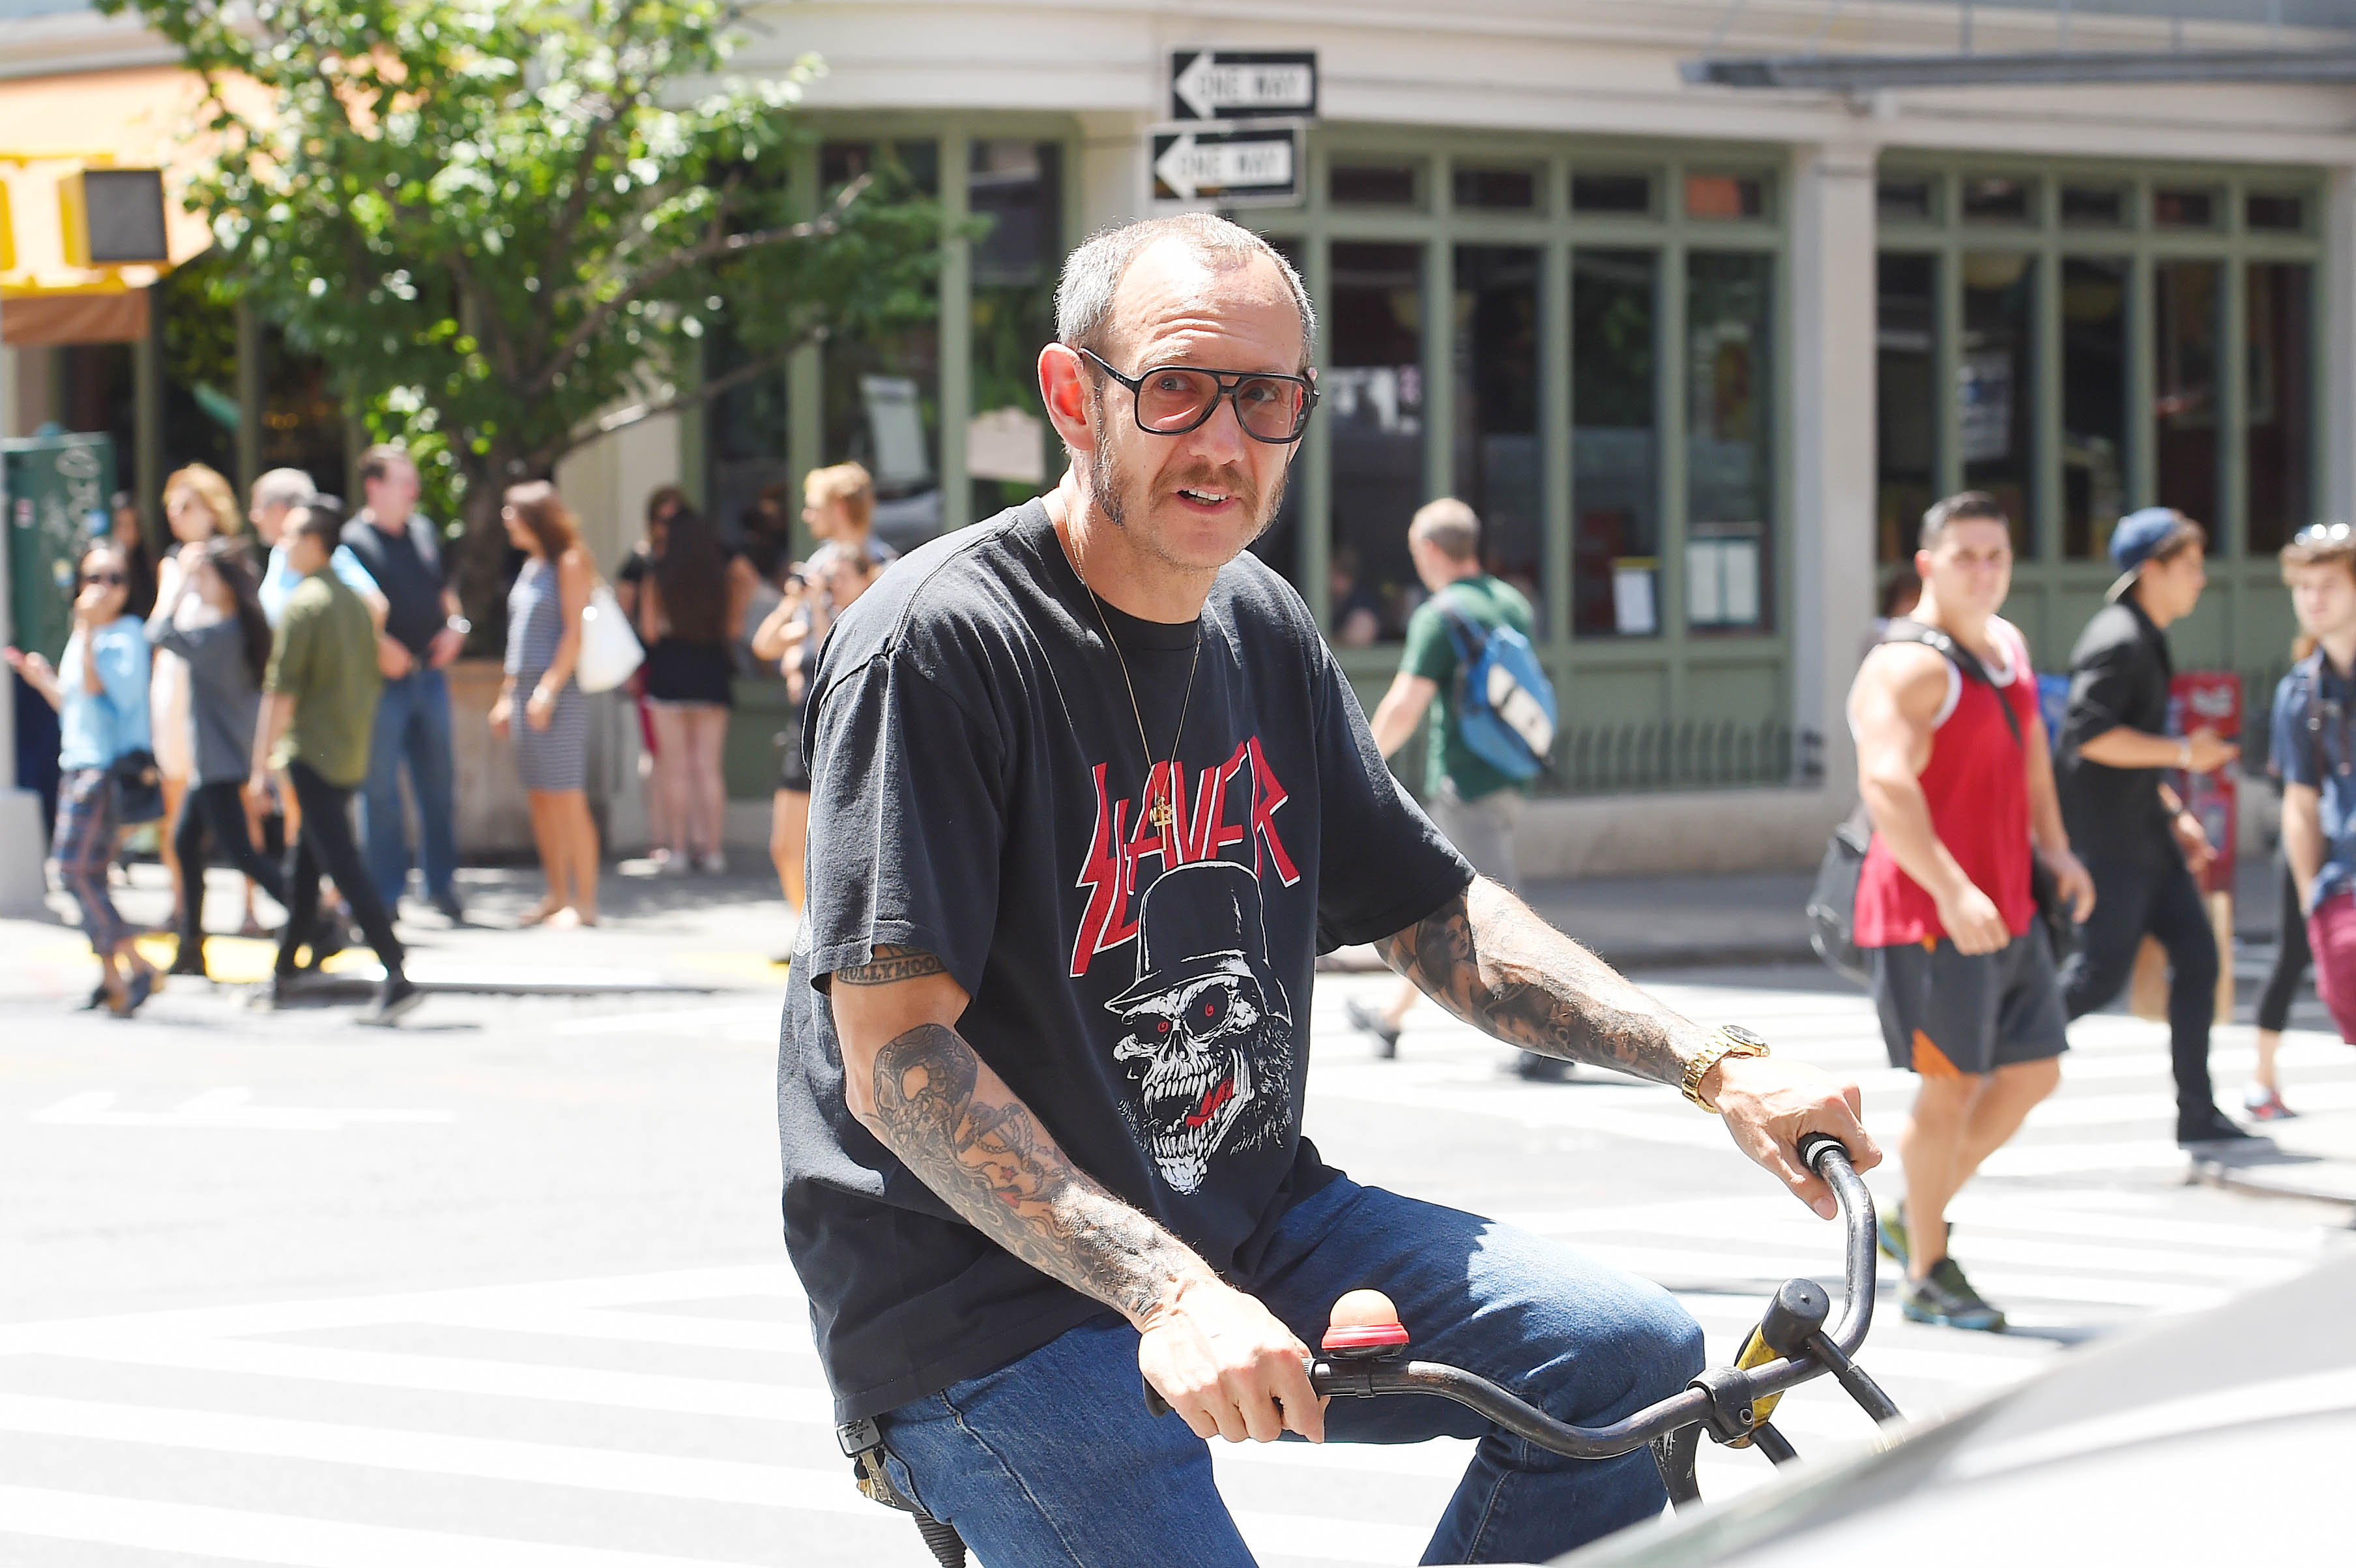 NEW YORK - JULY 24: Terry Richardson seen out in Soho with his bike on July 24, 2015 in New York, New York.  (Photo by Josiah Kamau/BuzzFoto via Getty Images) (Josiah Kamau&mdash;BuzzFoto via Getty Images)